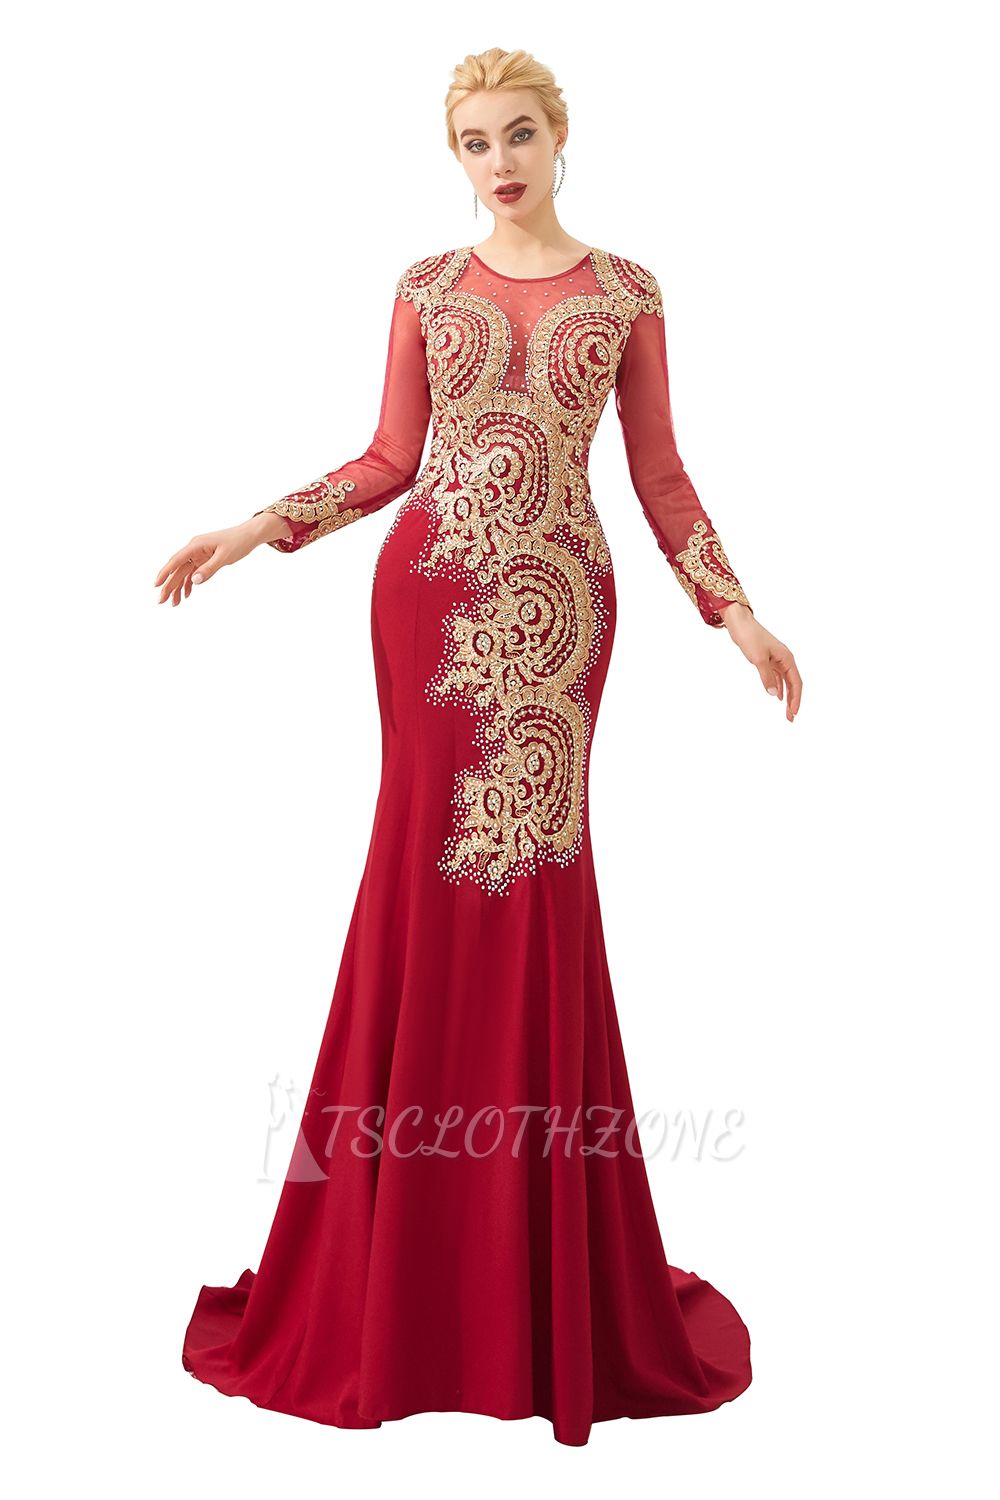 Harley | Luxury Illusion neck Long Sleeves Prom Dress with Sparkling Gold Lace Appliques